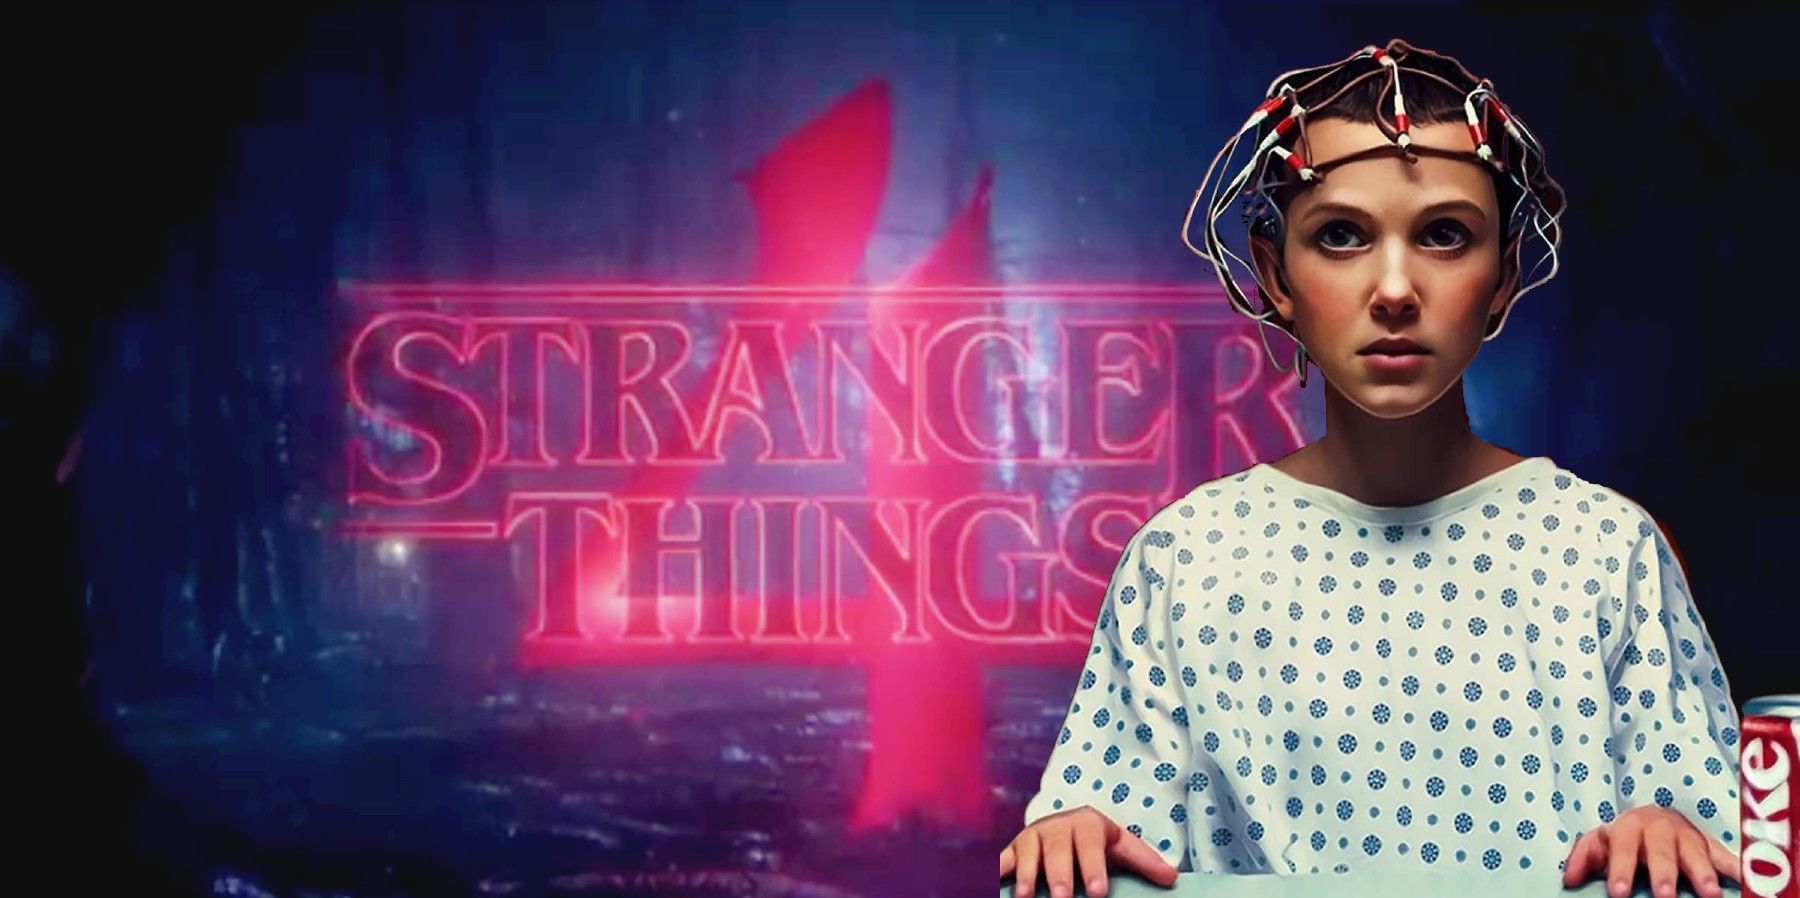 Every Clue You Missed in the 'Stranger Things' Season 4 Teaser Posters